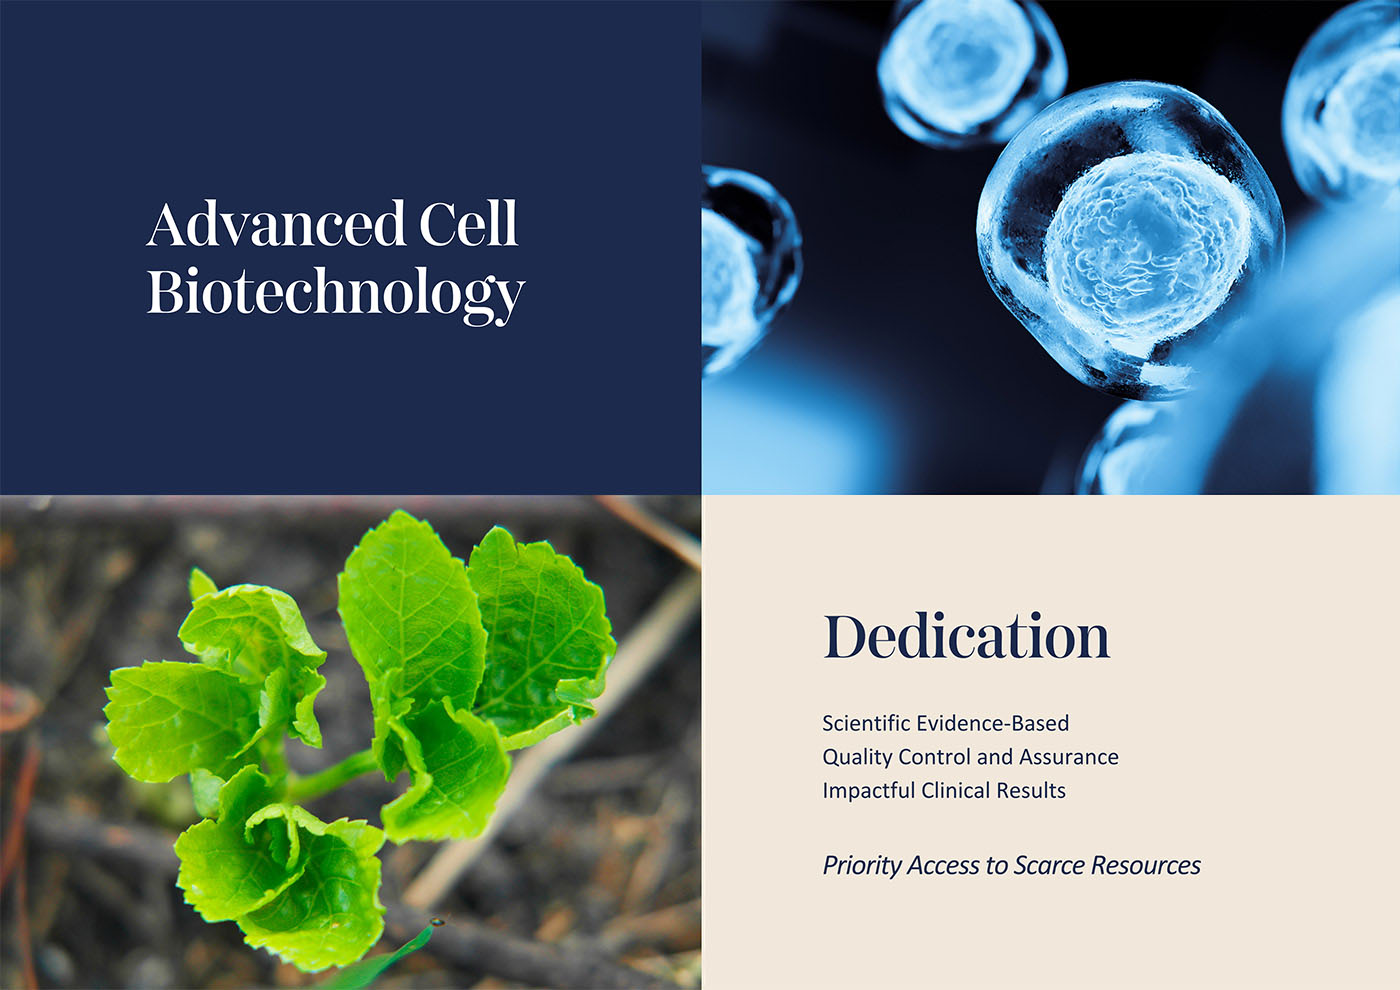 Advanced Cell Biotechnology, Dedication, Scientific Evidence-Based, Quality Control and Assurance, Impactful Clinical Results, Priority Access to Scarce Resources